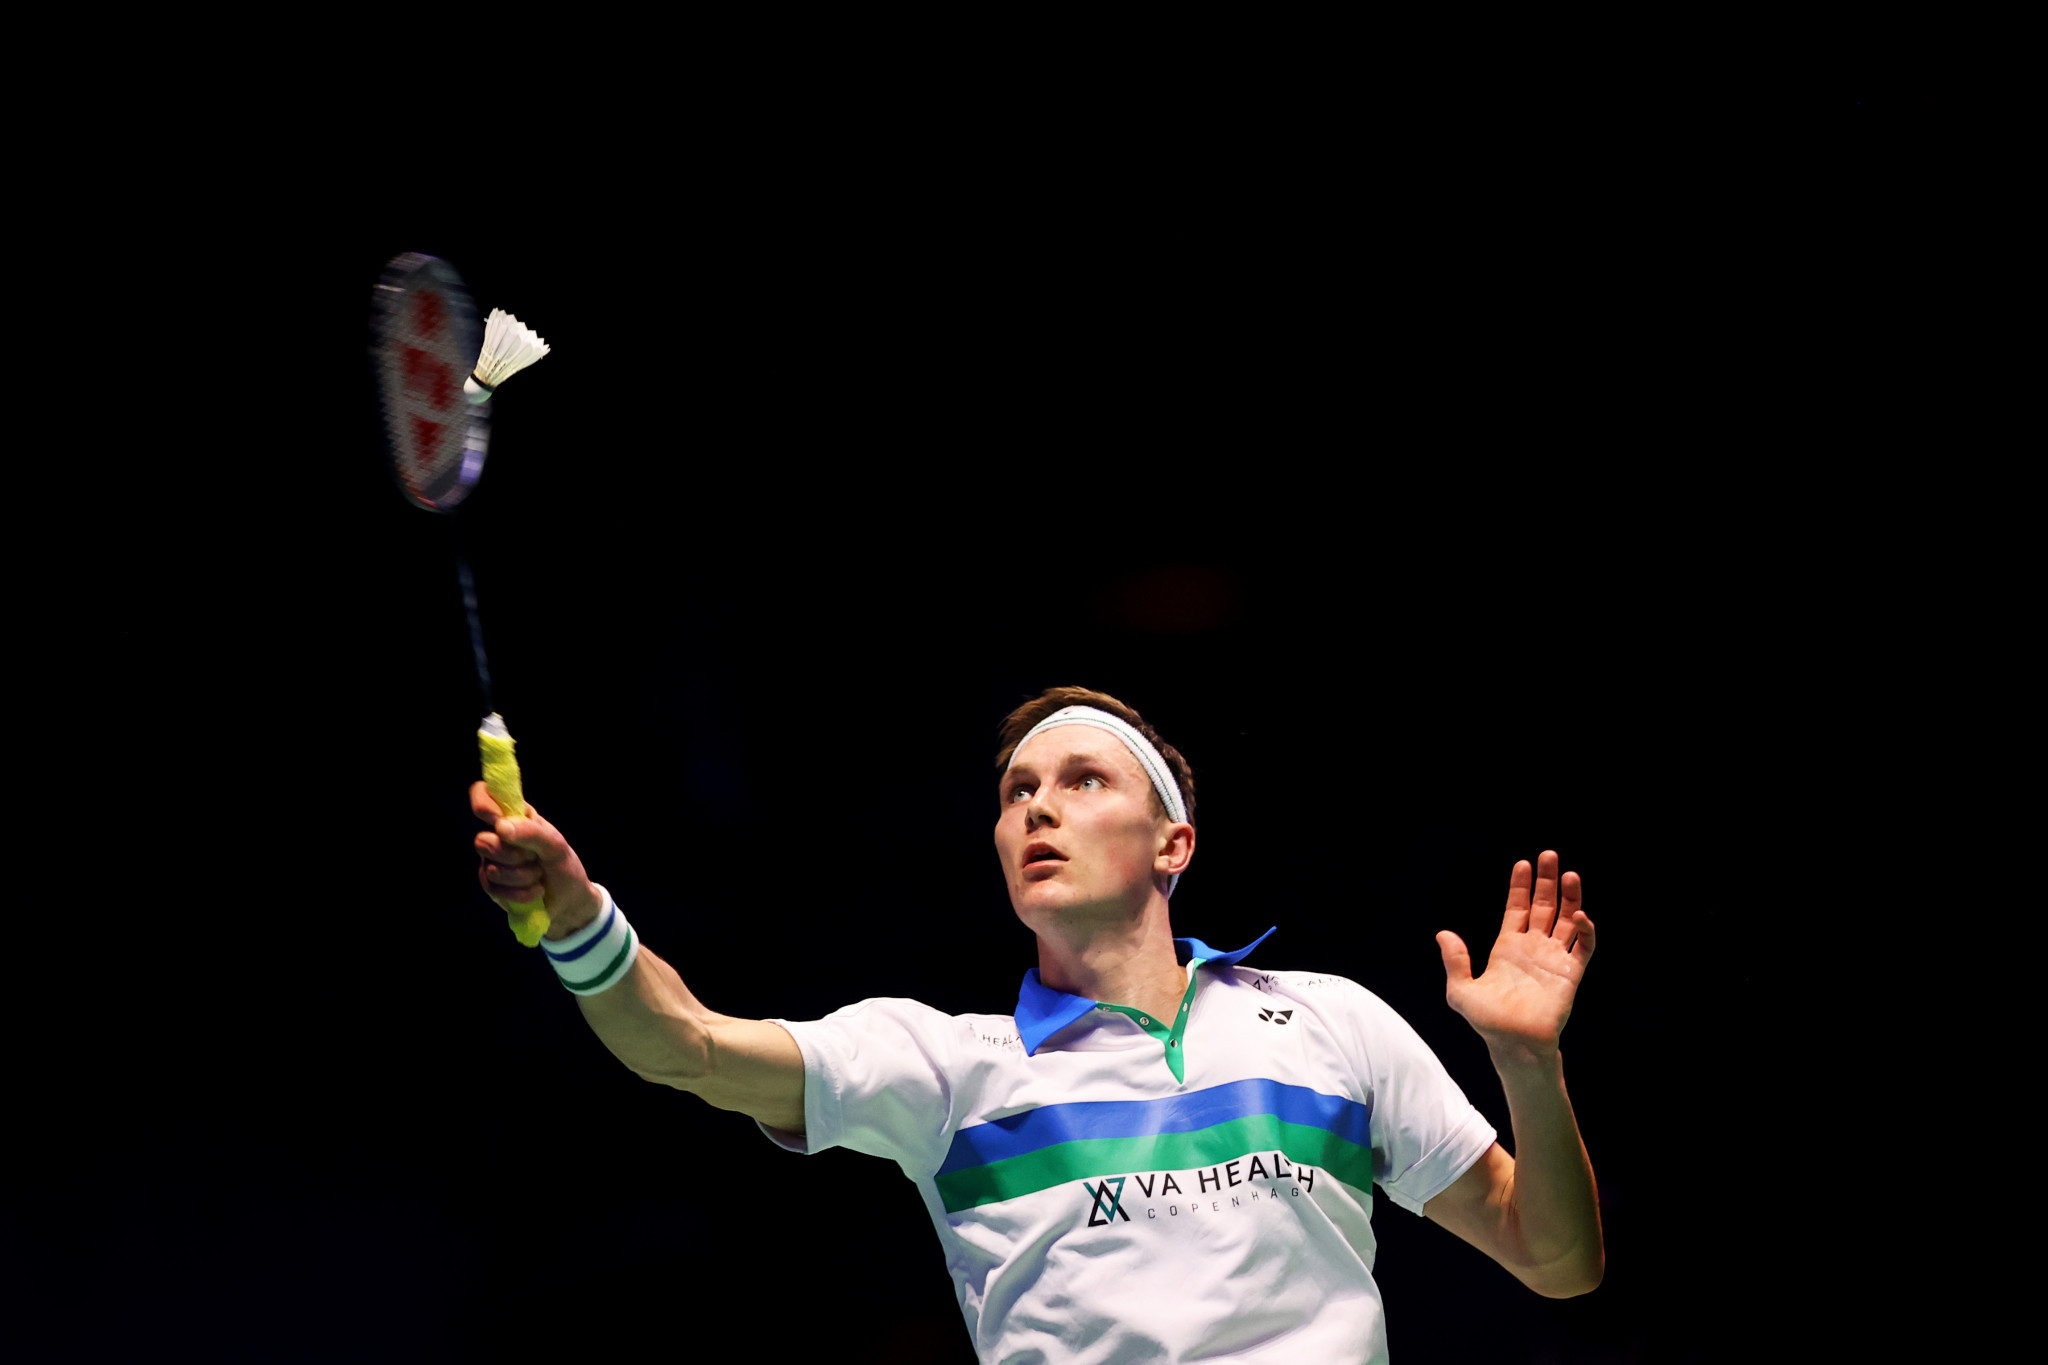 Denmark's Viktor Axelsen secured a comfortable victory in the men's singles final against Kunlavut Vitidsarn of Thailand at the BWF World Tour Finals ©Getty Images